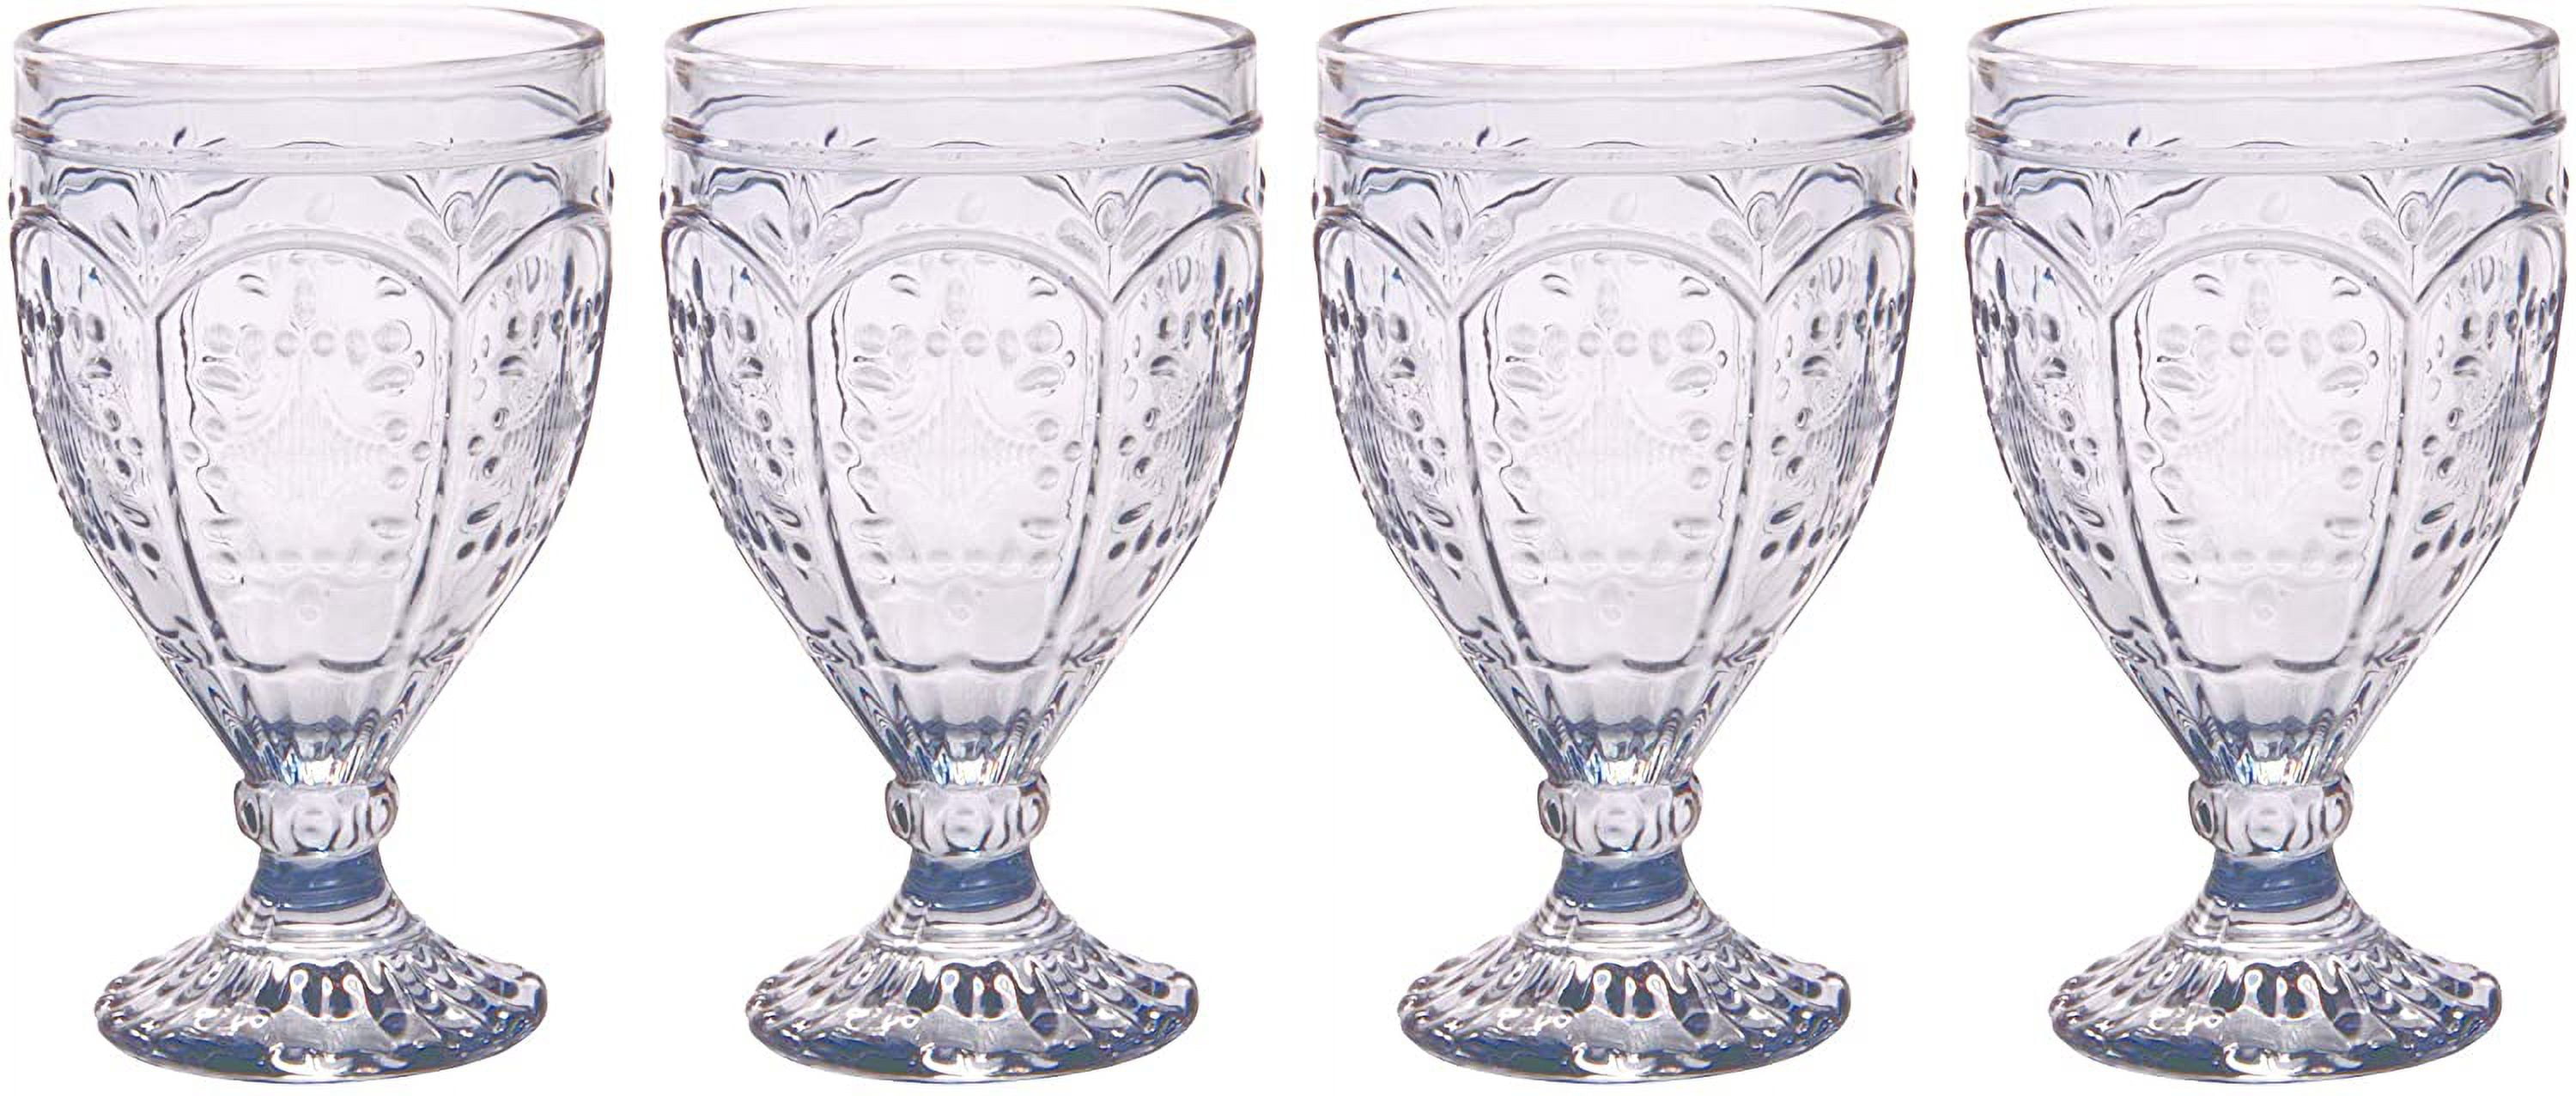 Fitz and Floyd Trestle Highball Glasses Clear - Set of 4